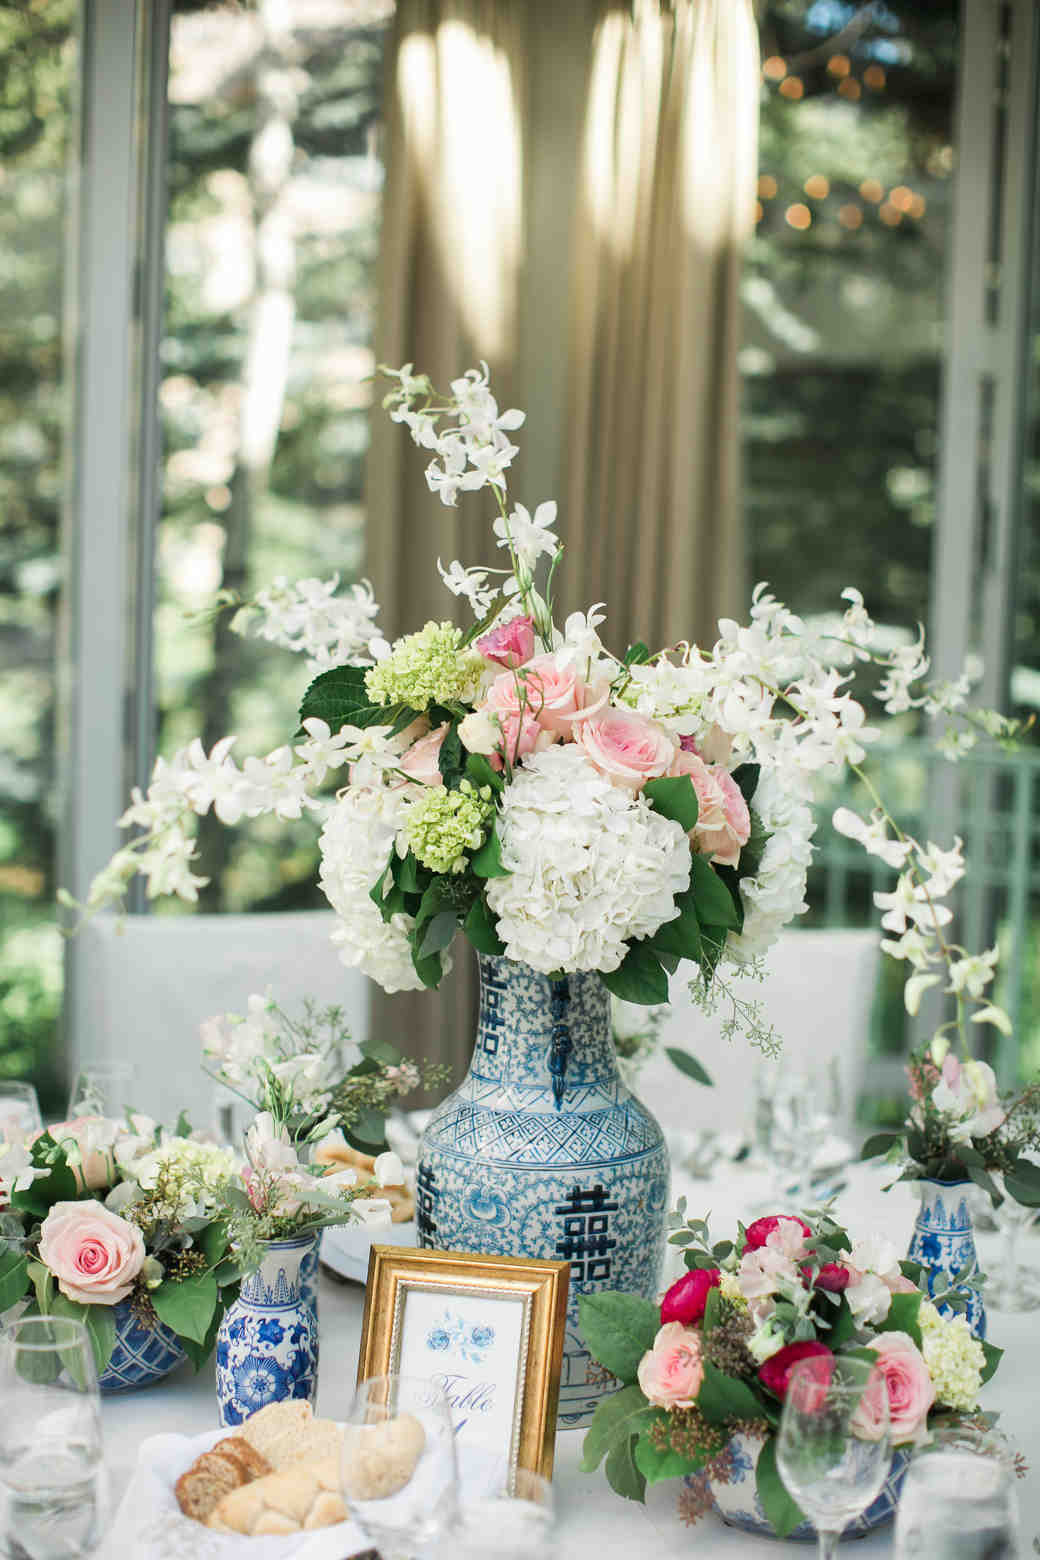 Themes For Wedding Showers
 37 Bridal Shower Themes That Are Truly e of a Kind